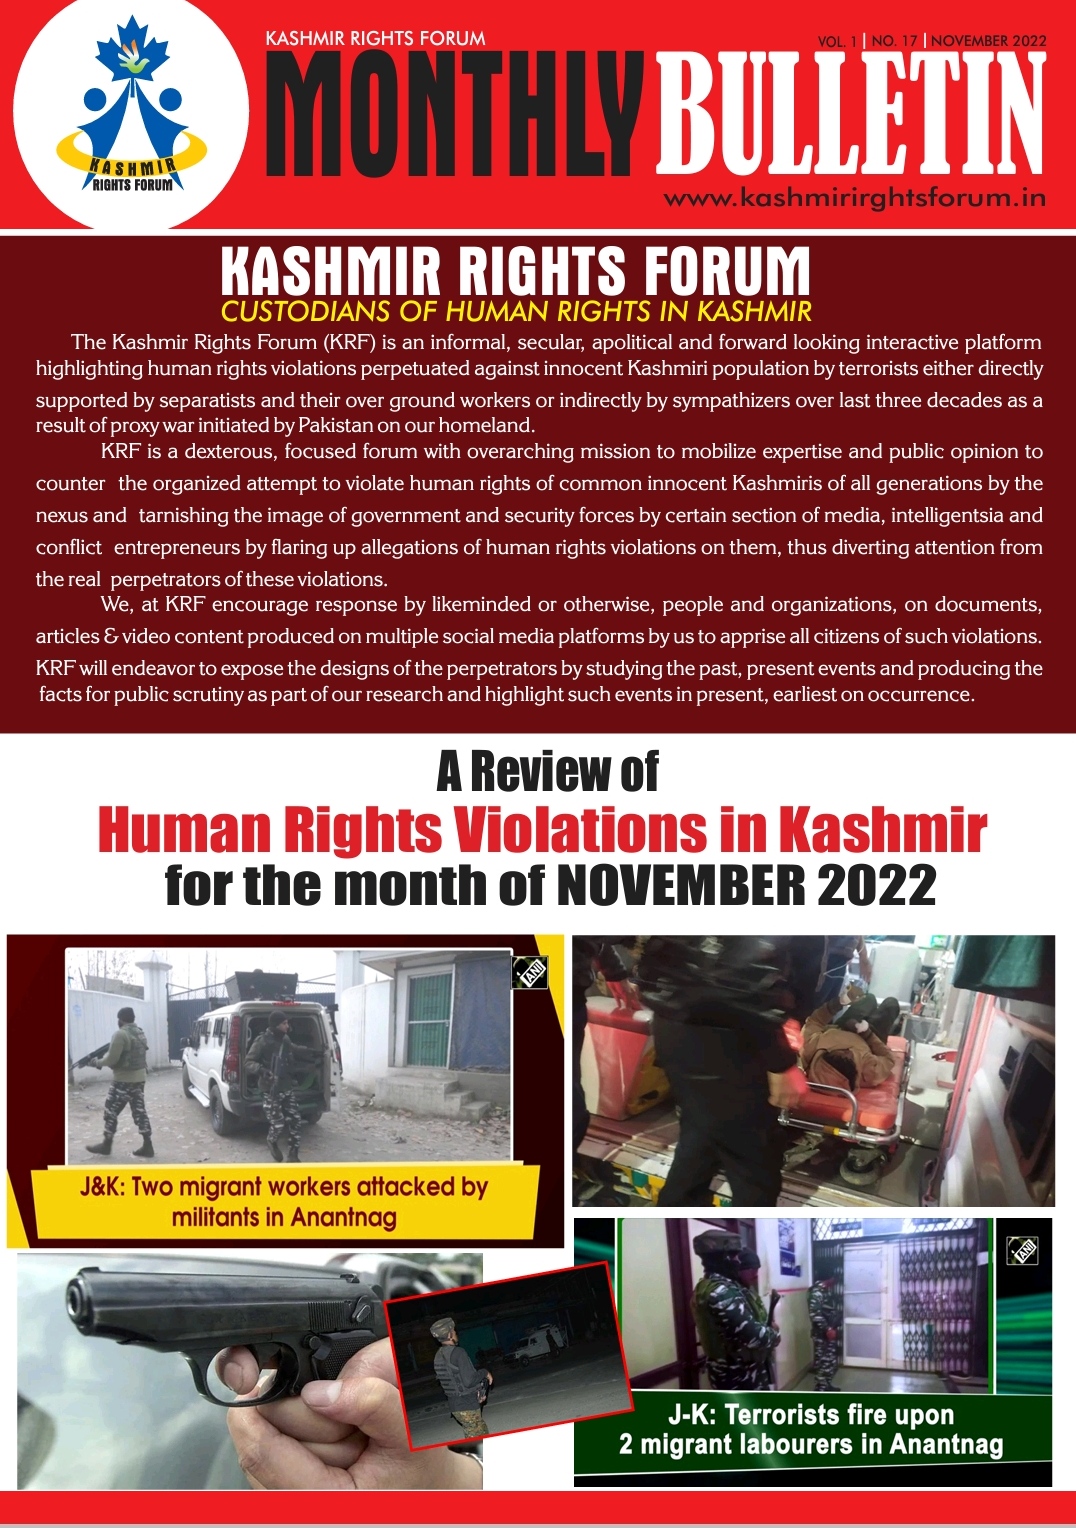 A preview of the Monthly Bulletin November 2022 comprising of Human Rights Violations in Kashmir at hands of terrorists.